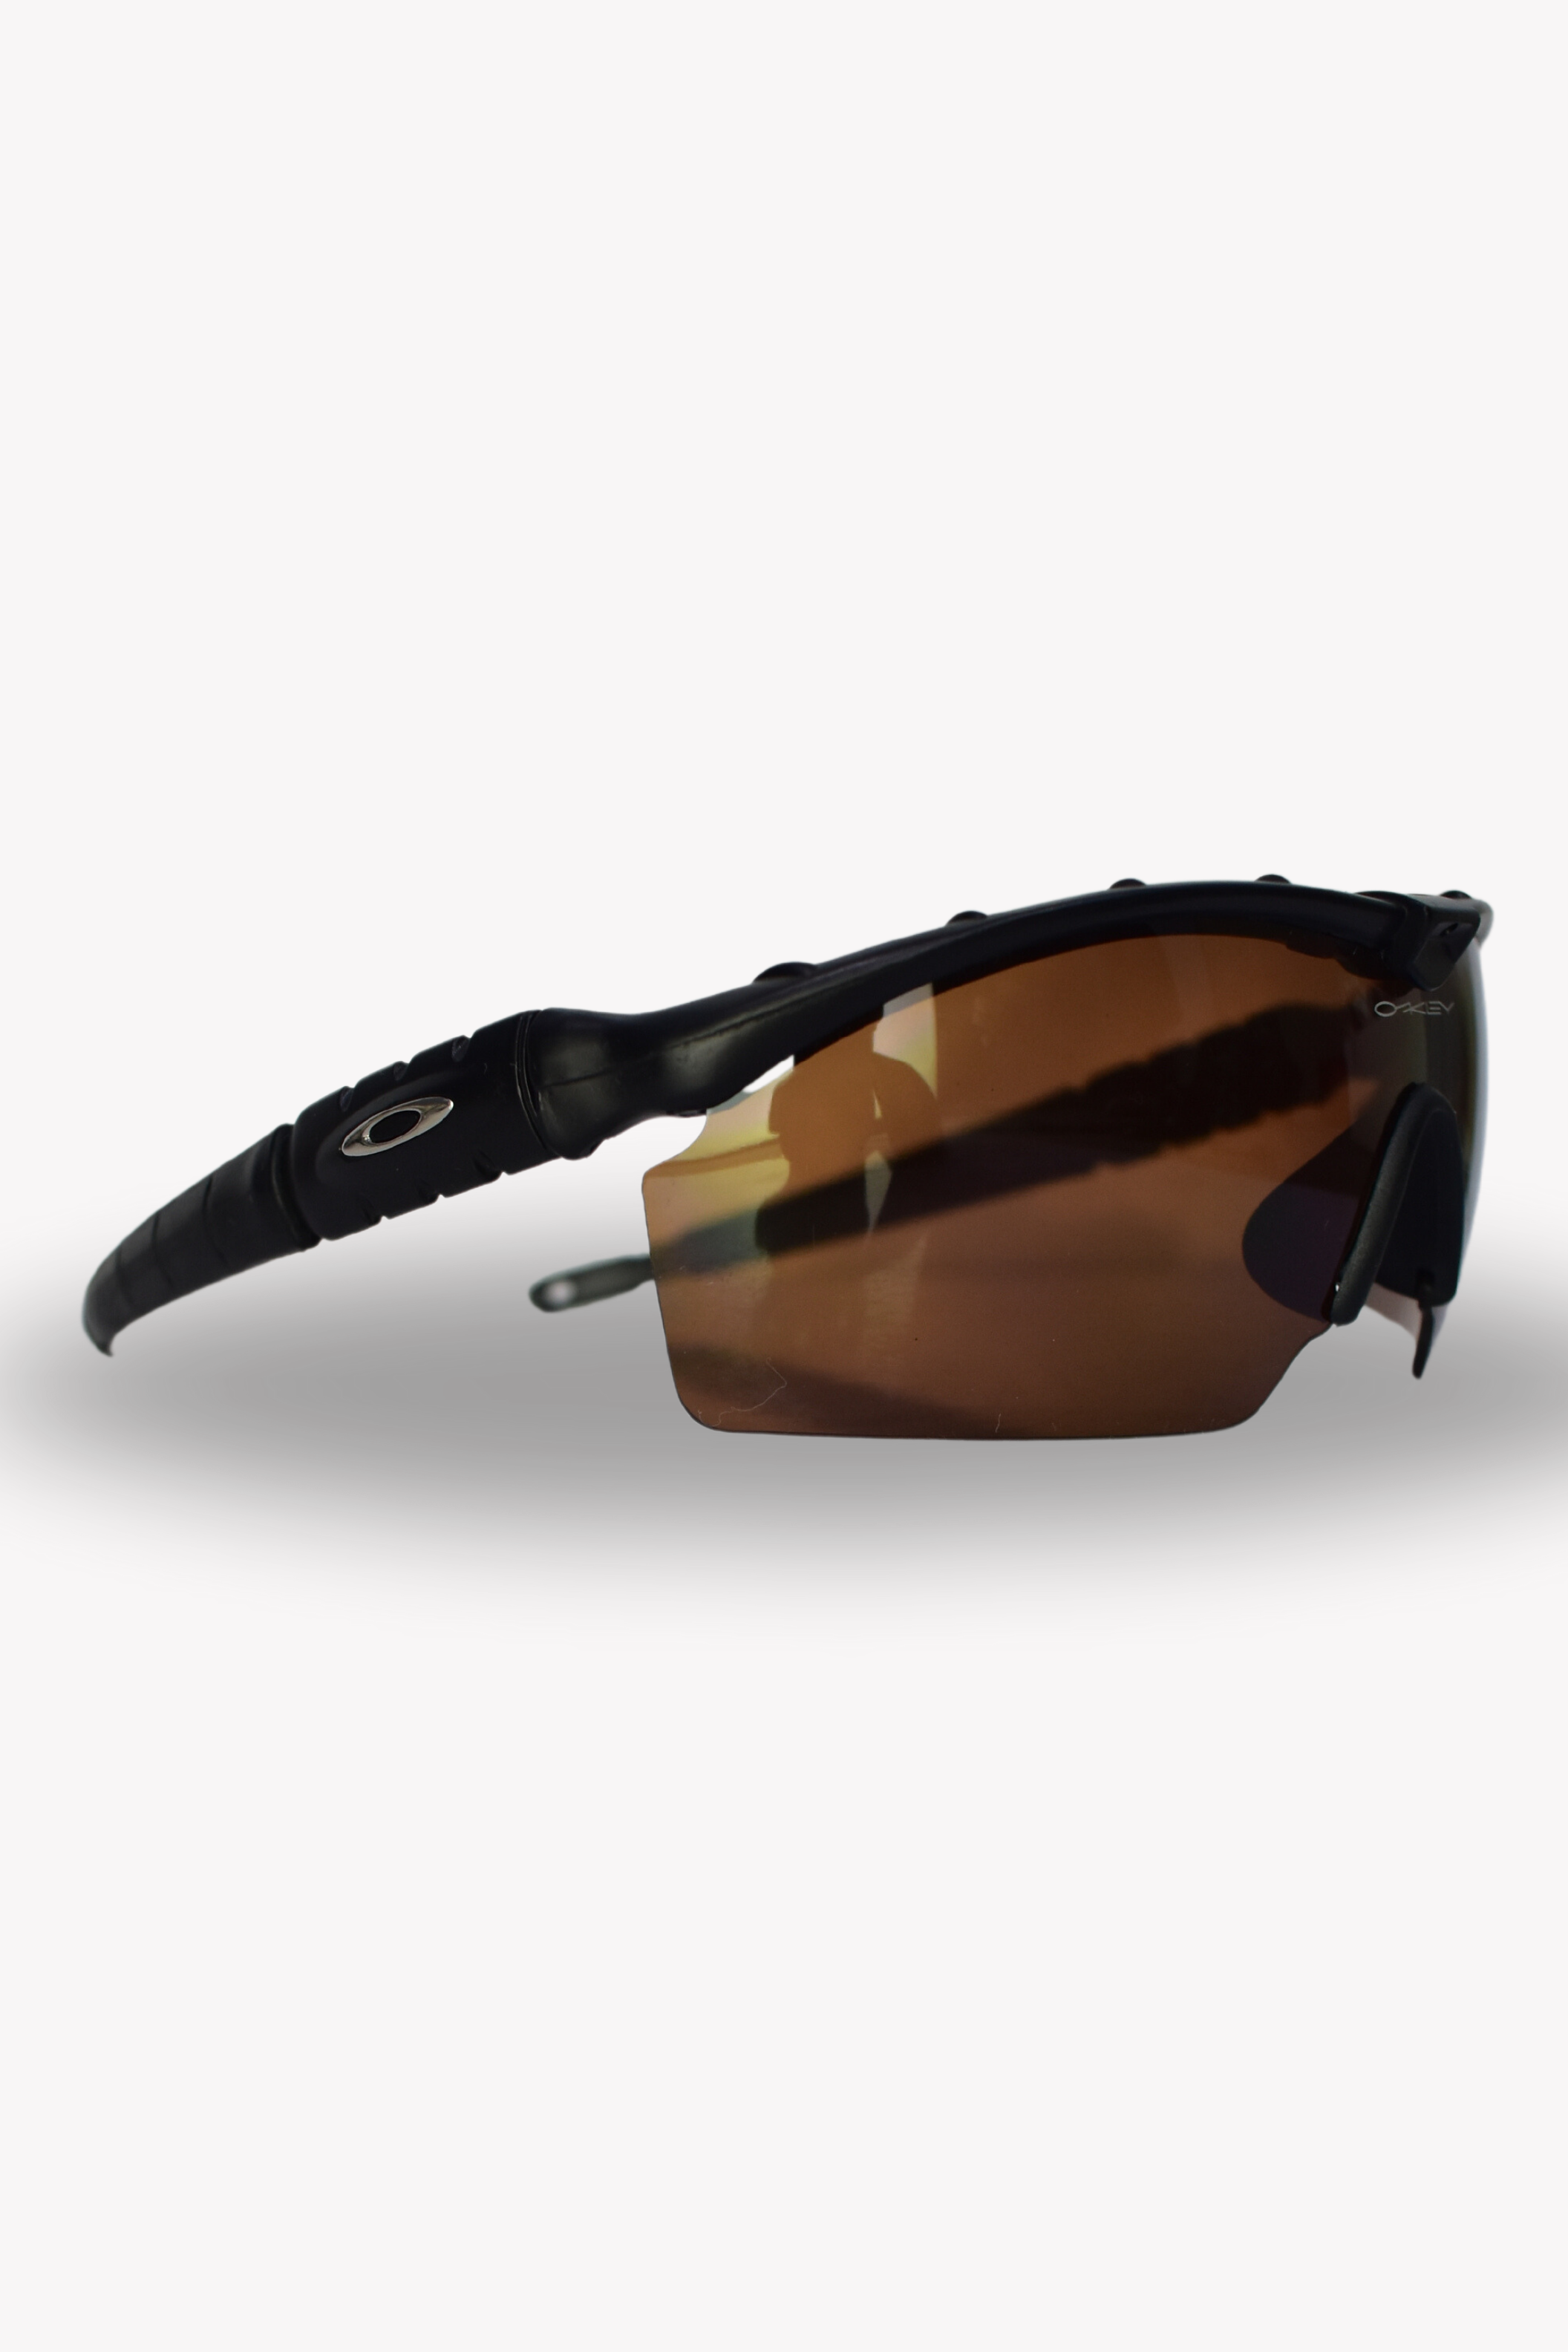 Oakley Adult Sun Glasses black and brown